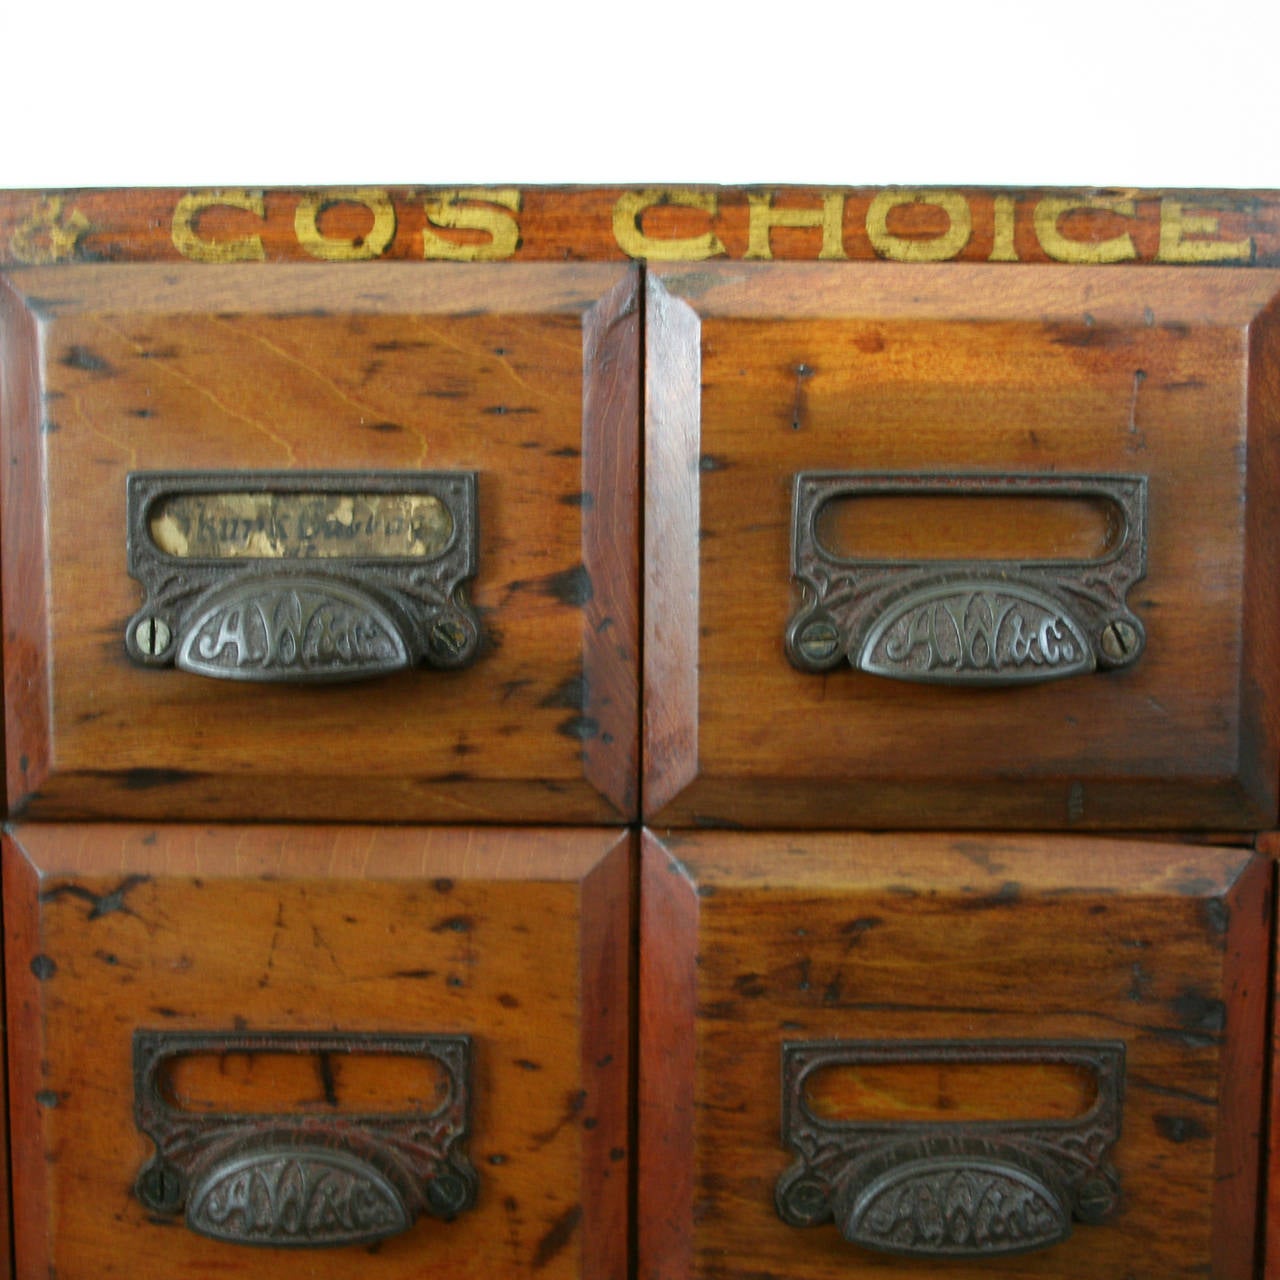 Often replicated, but never truly duplicated, authentic apothecary cabinets are rare (and often misidentified) birds within the antique community. Made by Allaire Woodward & Company, a prolific mid-western producer of herbal remedies in the late